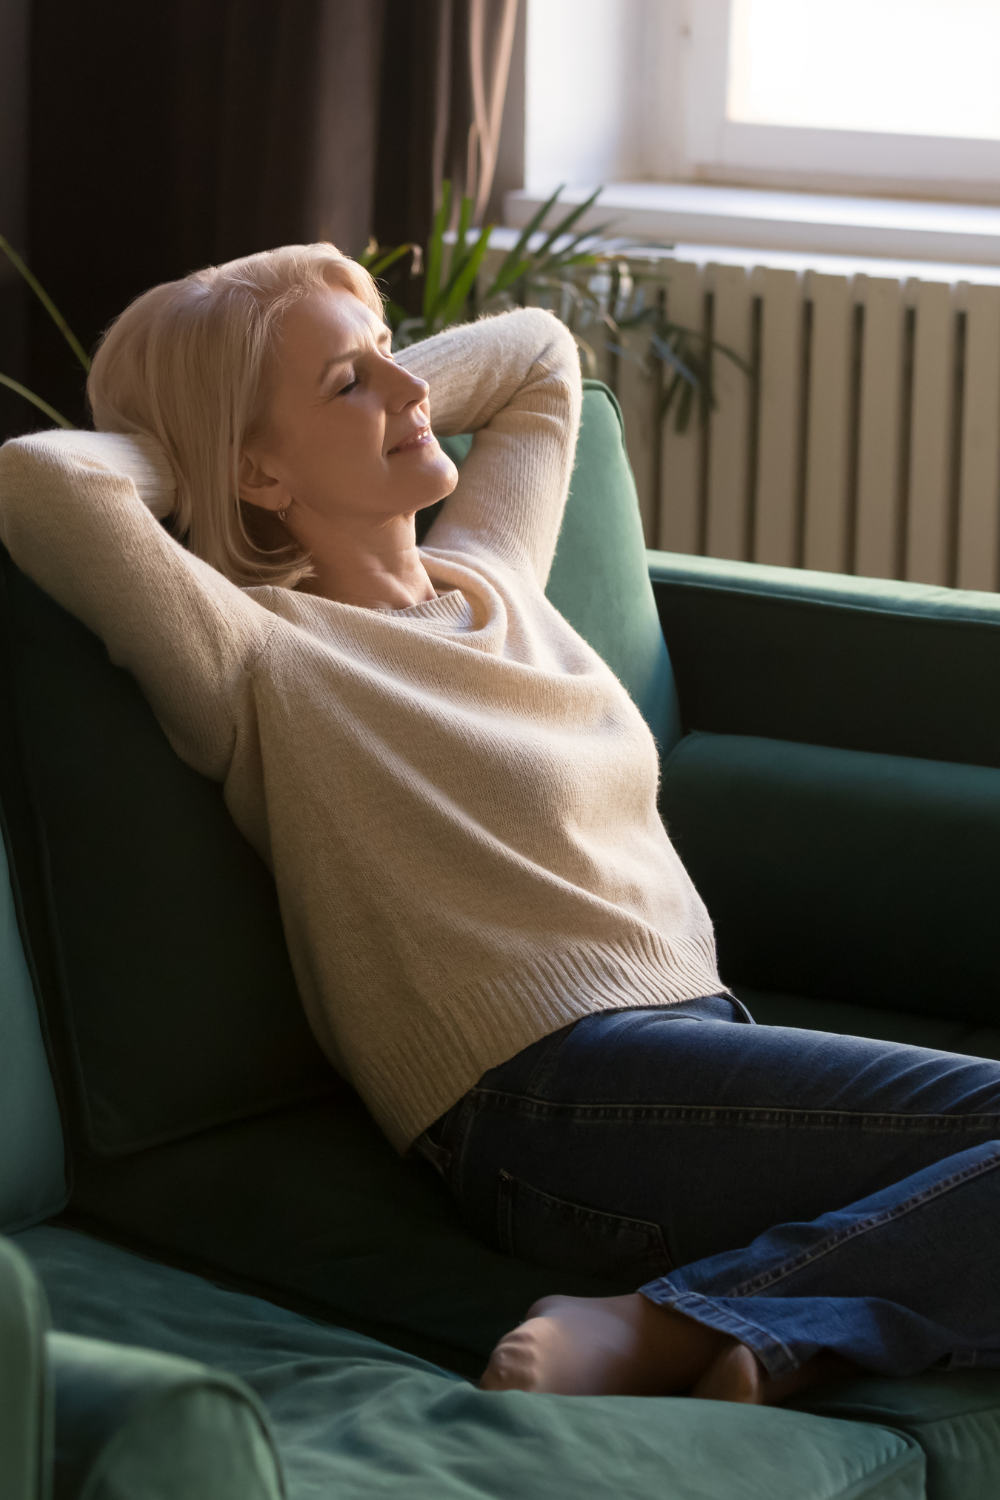 Woman resting on couch with eyes closed